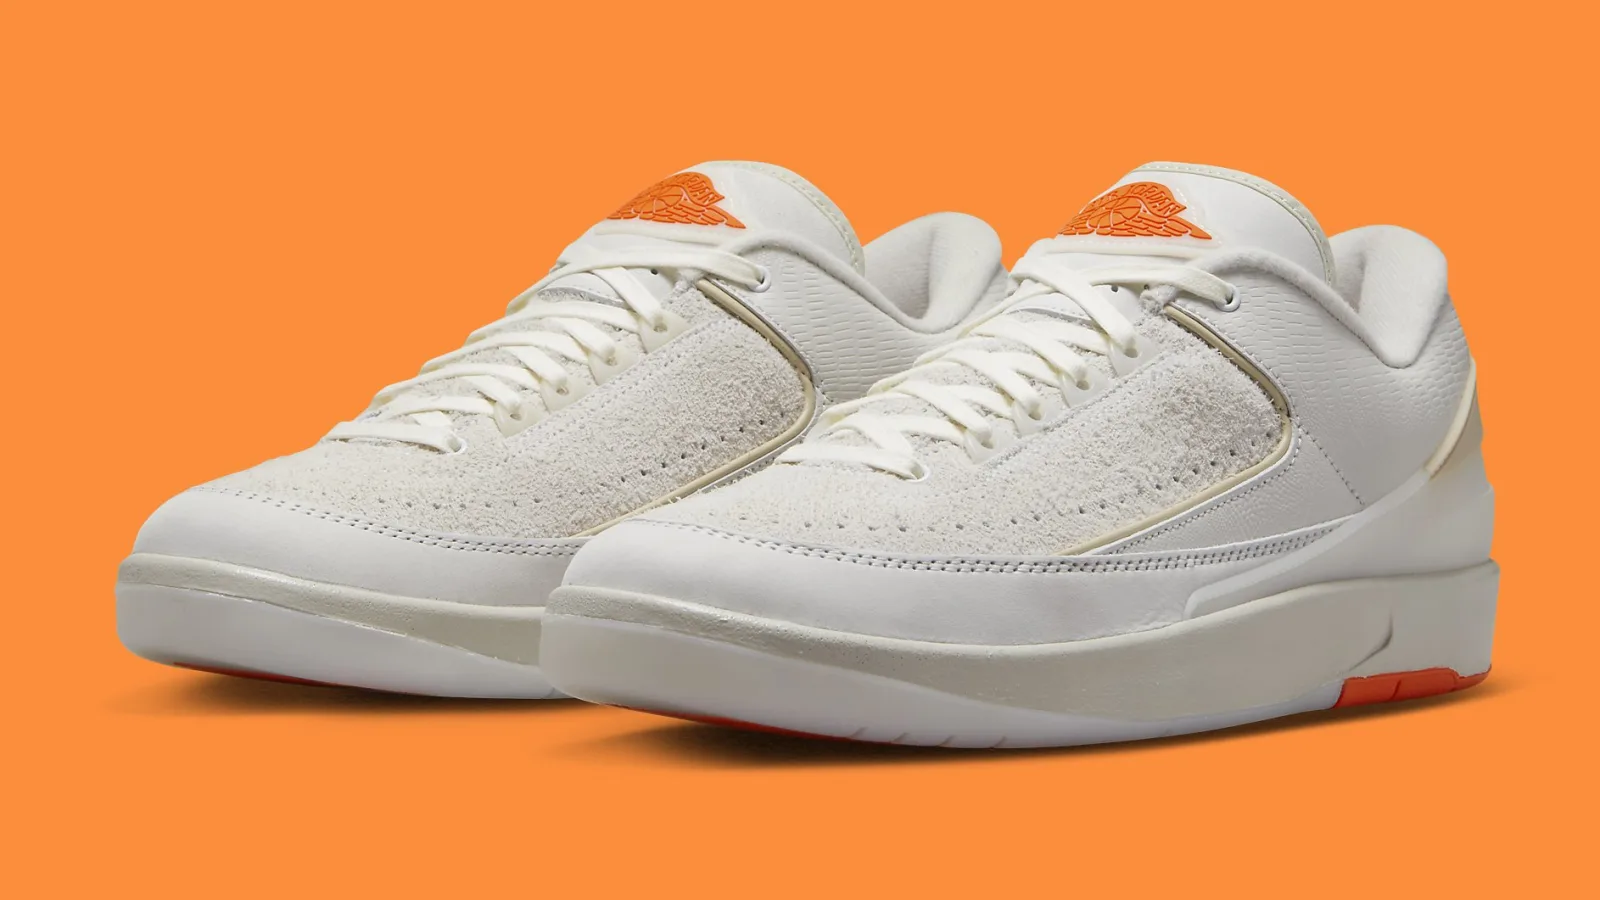 Where can I find affordable Shelflife x Air Jordan 2 Low sneakers?